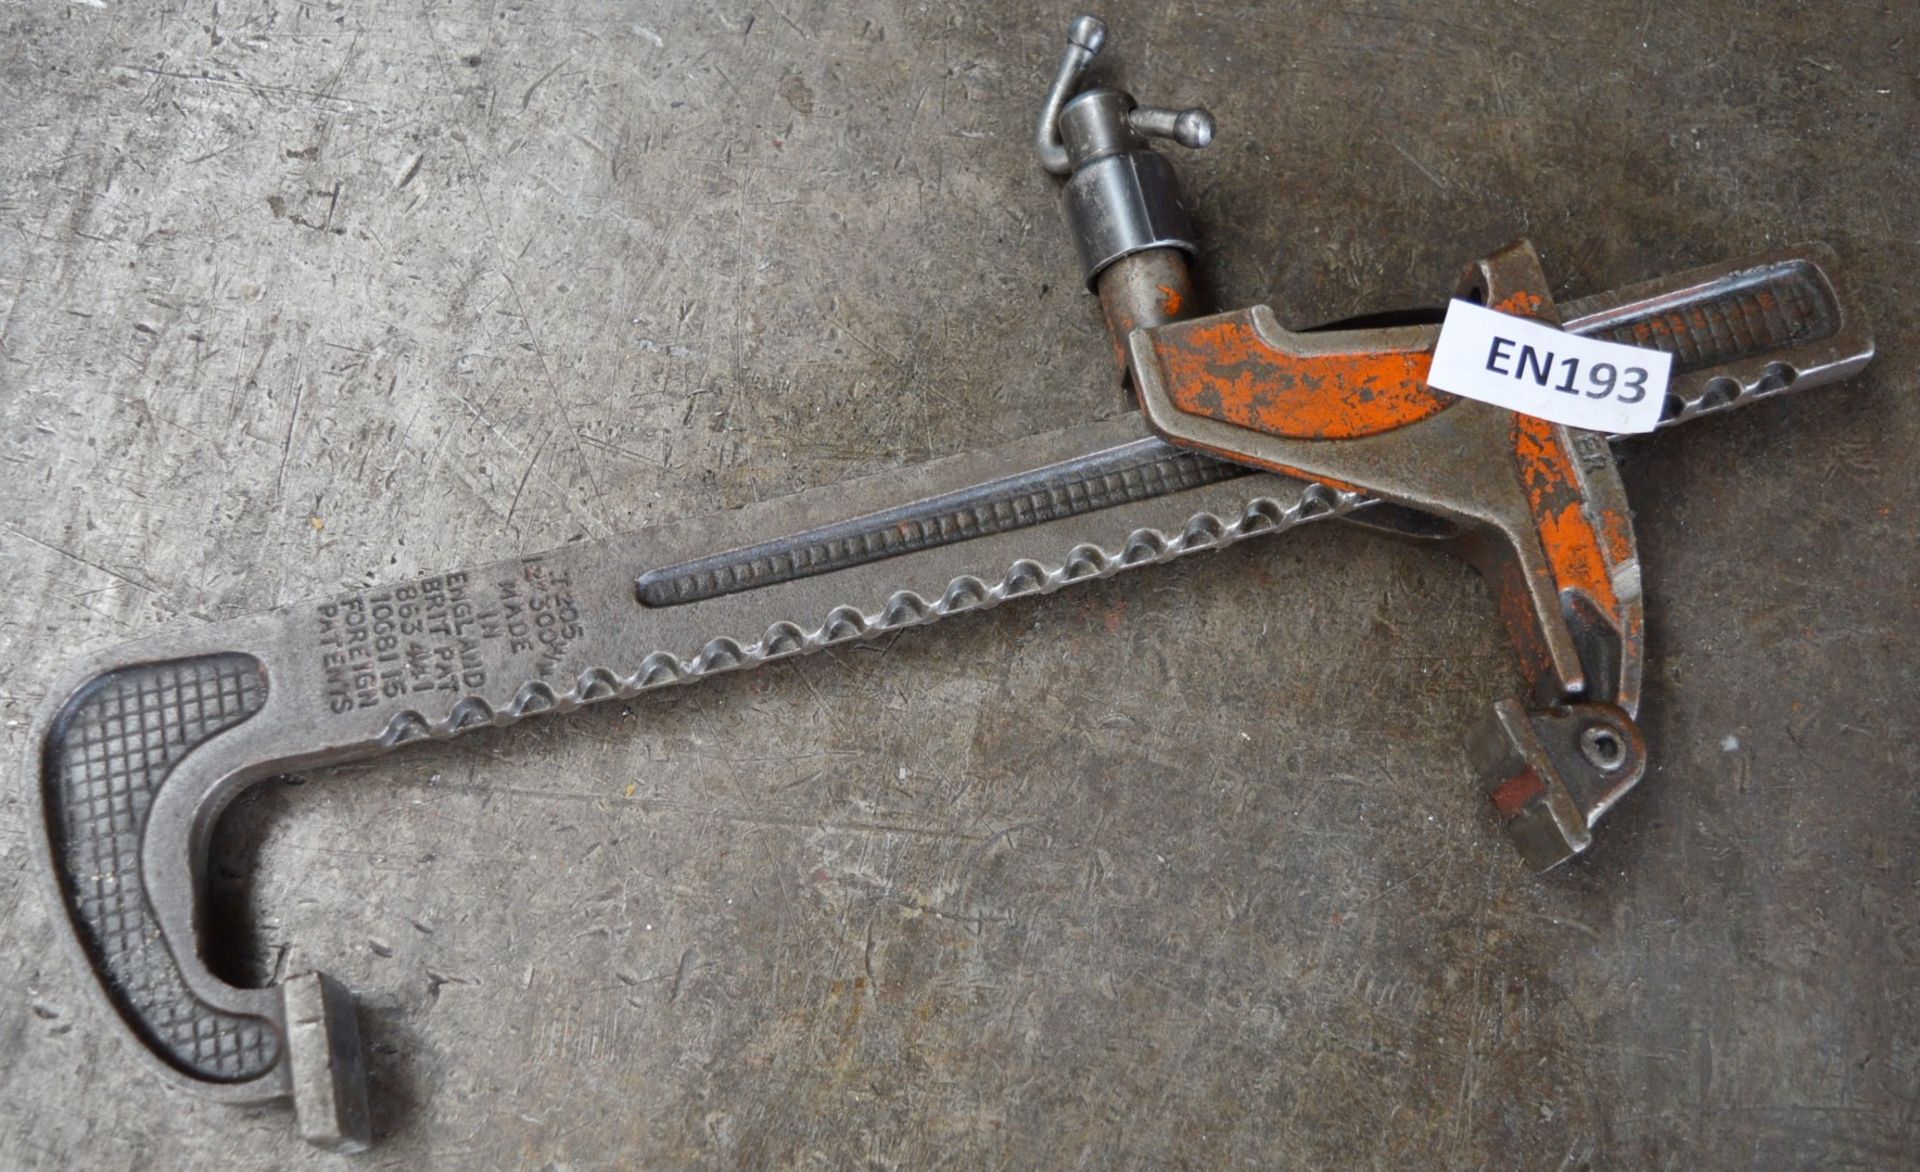 1 x Carver Heavy Duty Clamp - T205 12 Inch - CL202 -  Ref EN193 - Location: Worcester WR14